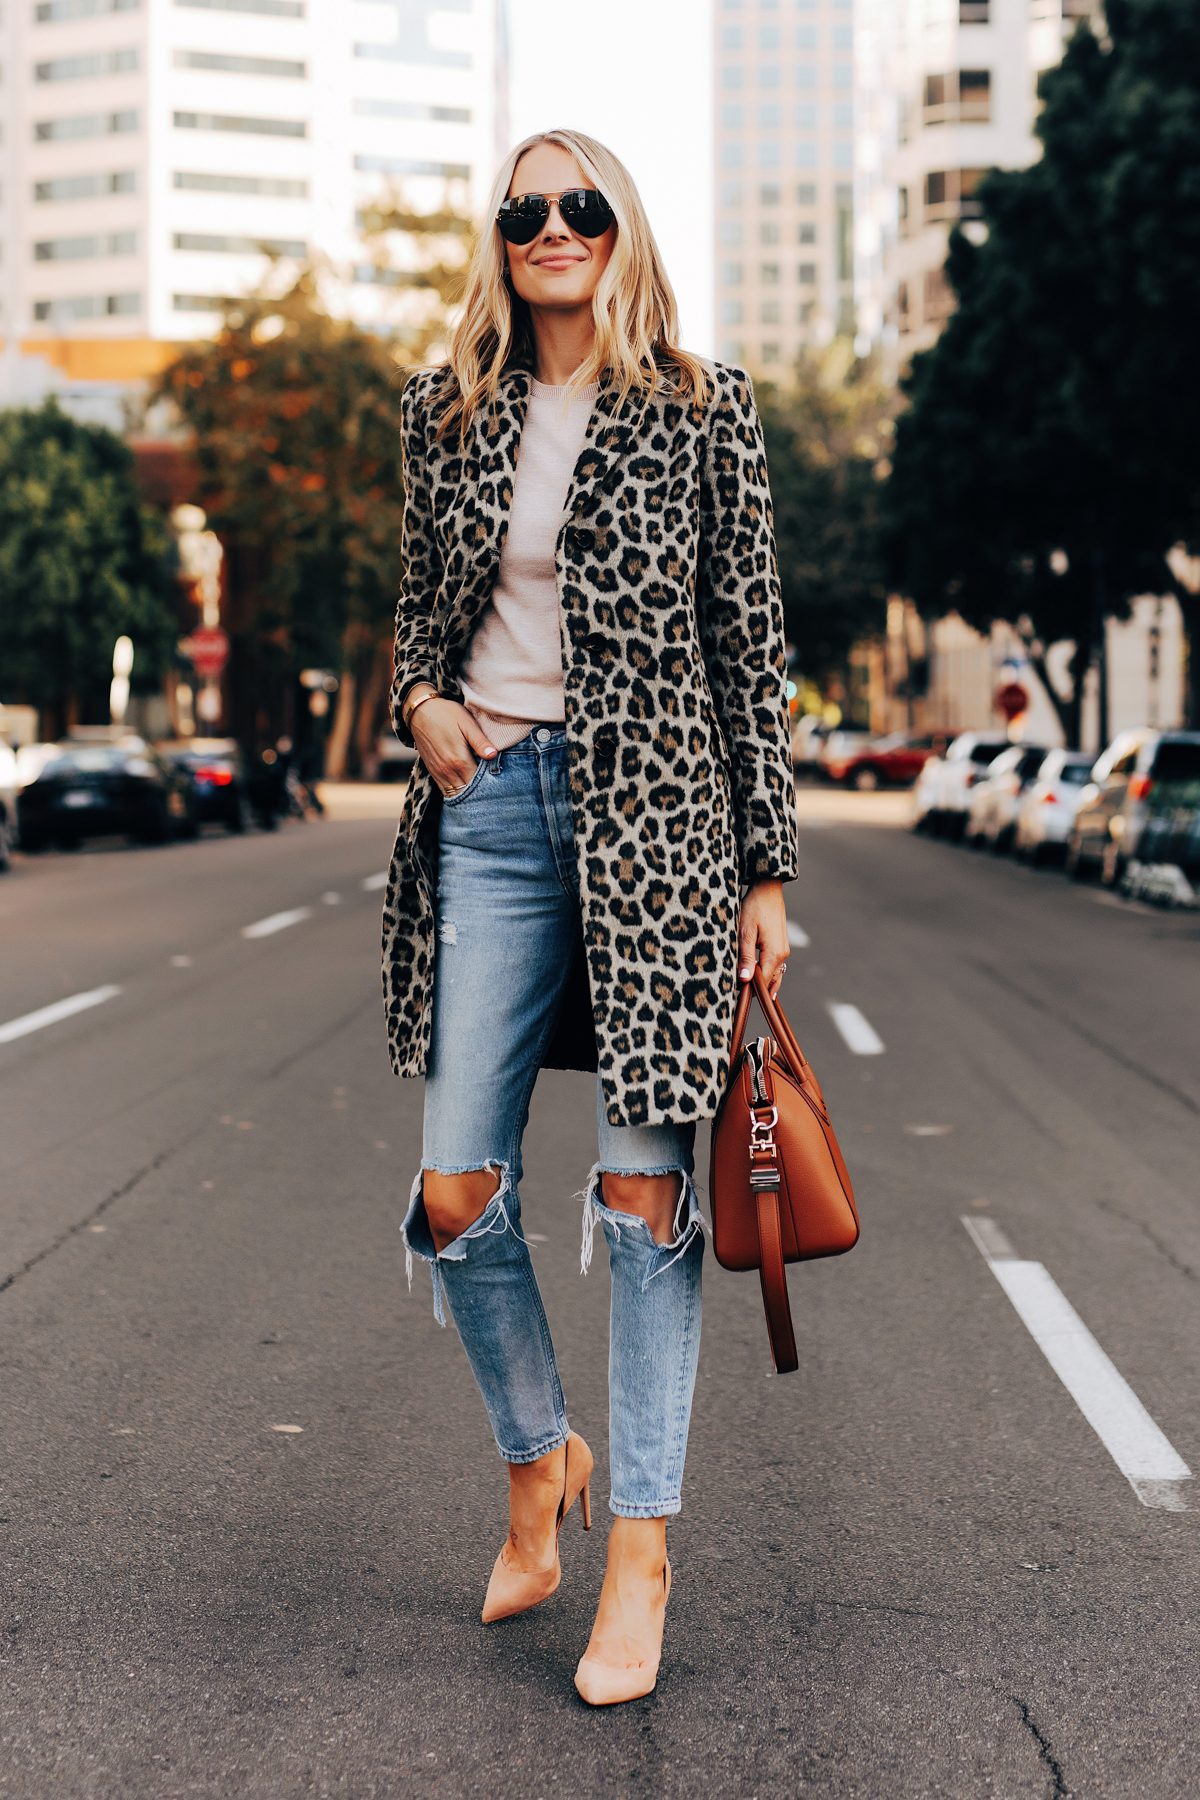 Leopard-Print-Coats.-1 60+ Most Fashionable '90s Outfit Ideas For Ladies That Are Coming Back in 2022